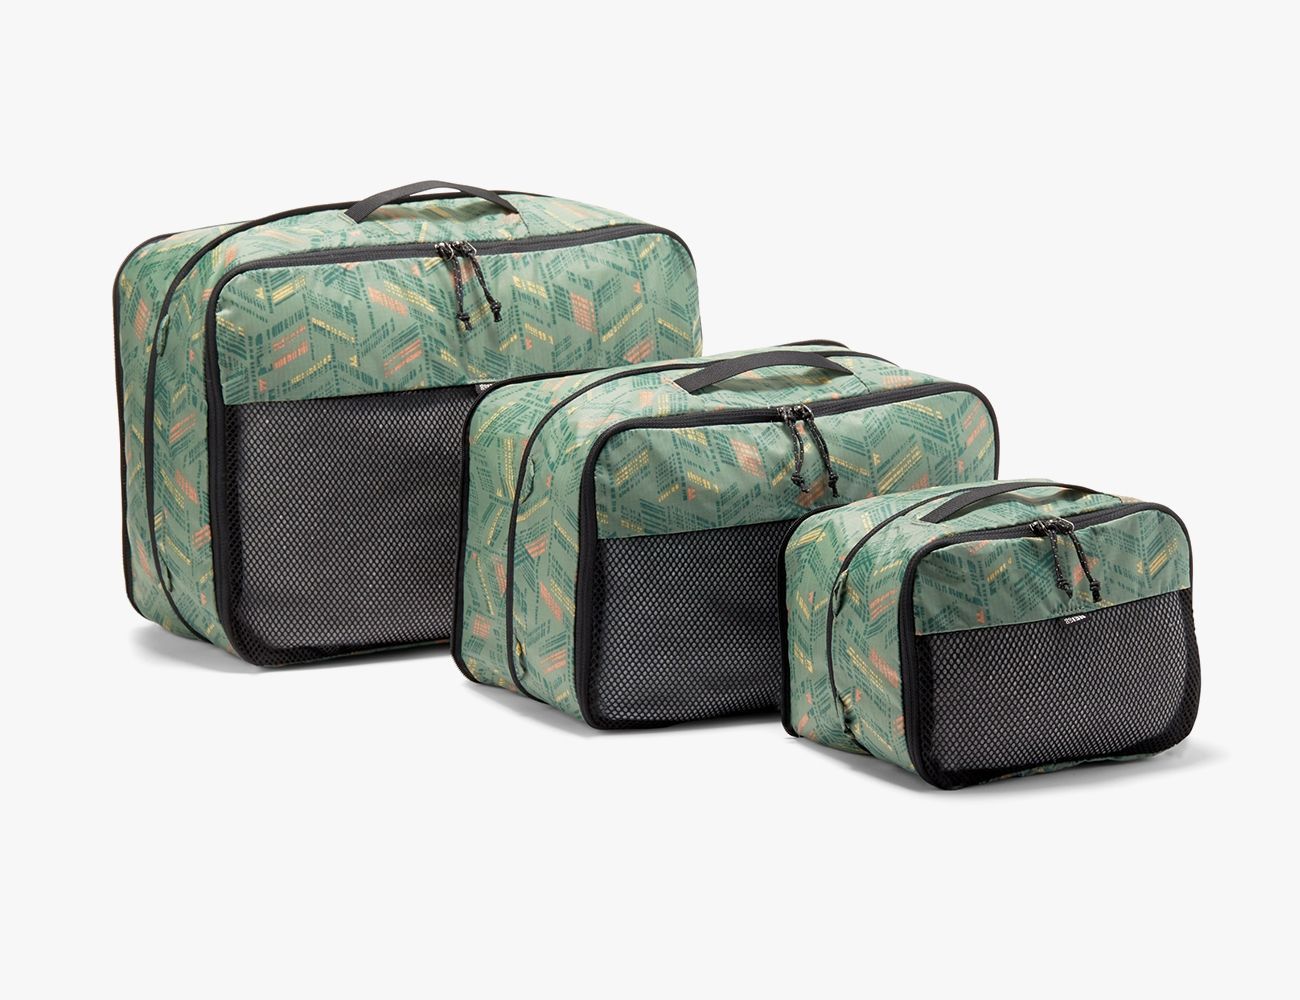 The 12 Best Packing Cubes for Travel